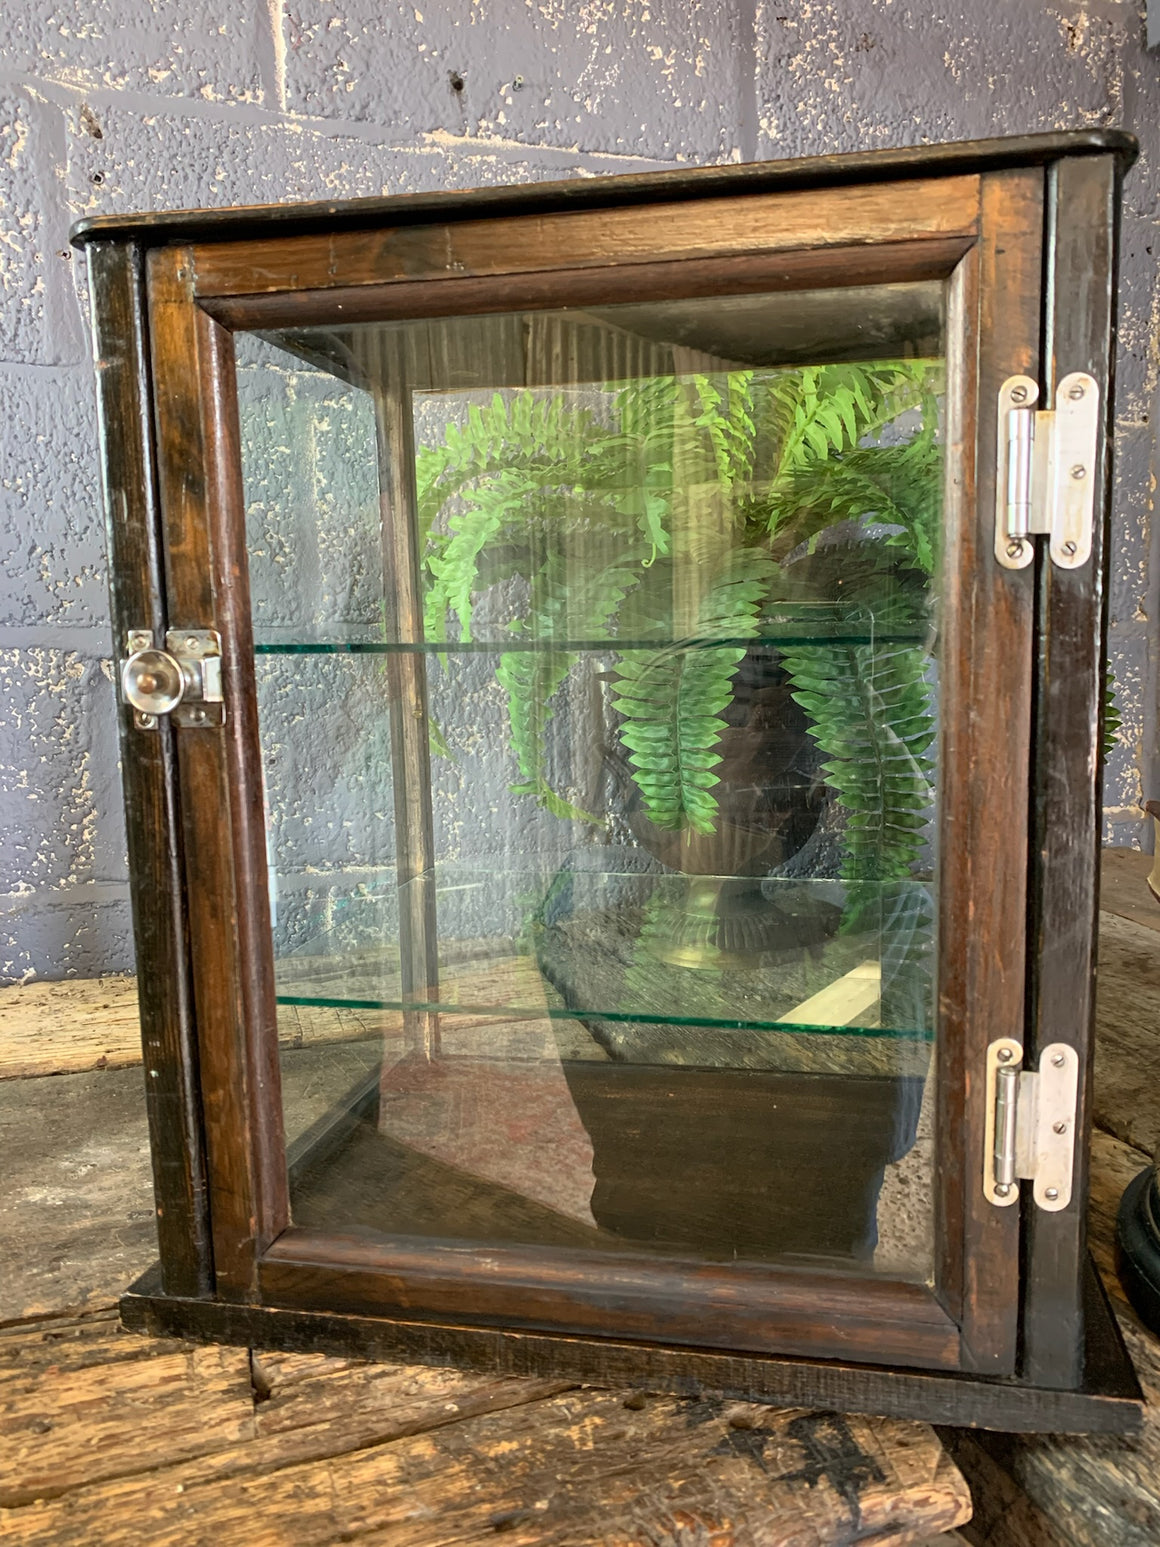 An Edwardian table top shop display cabinet